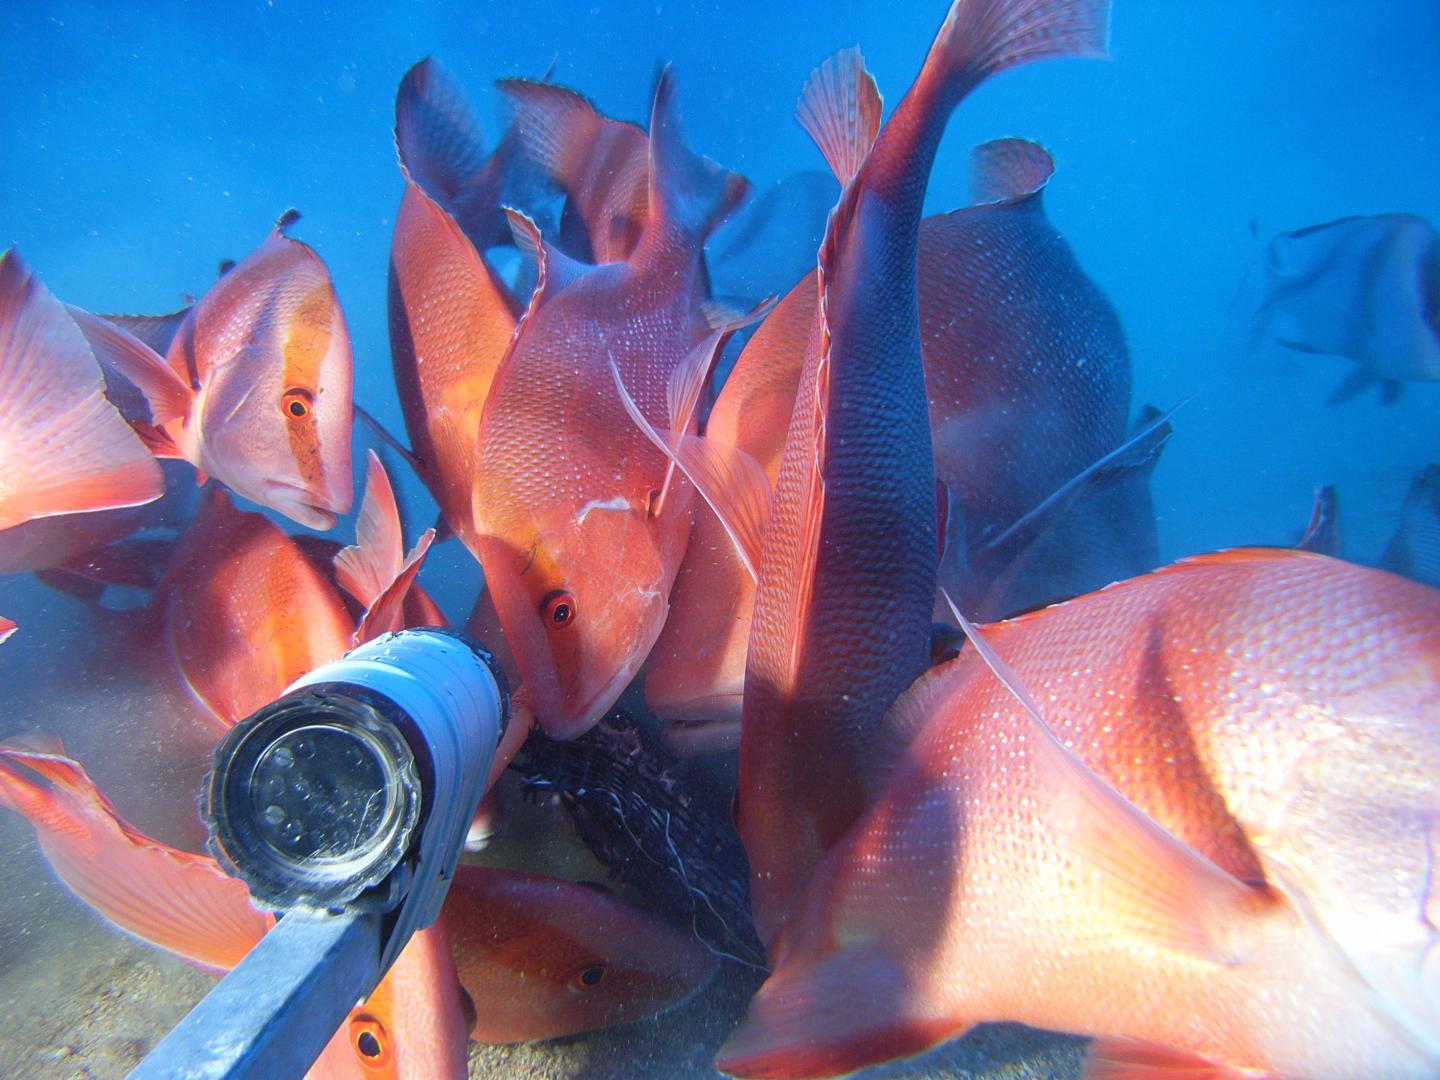 Red emperor fishes crowd a bait bag and underwater video cameras.